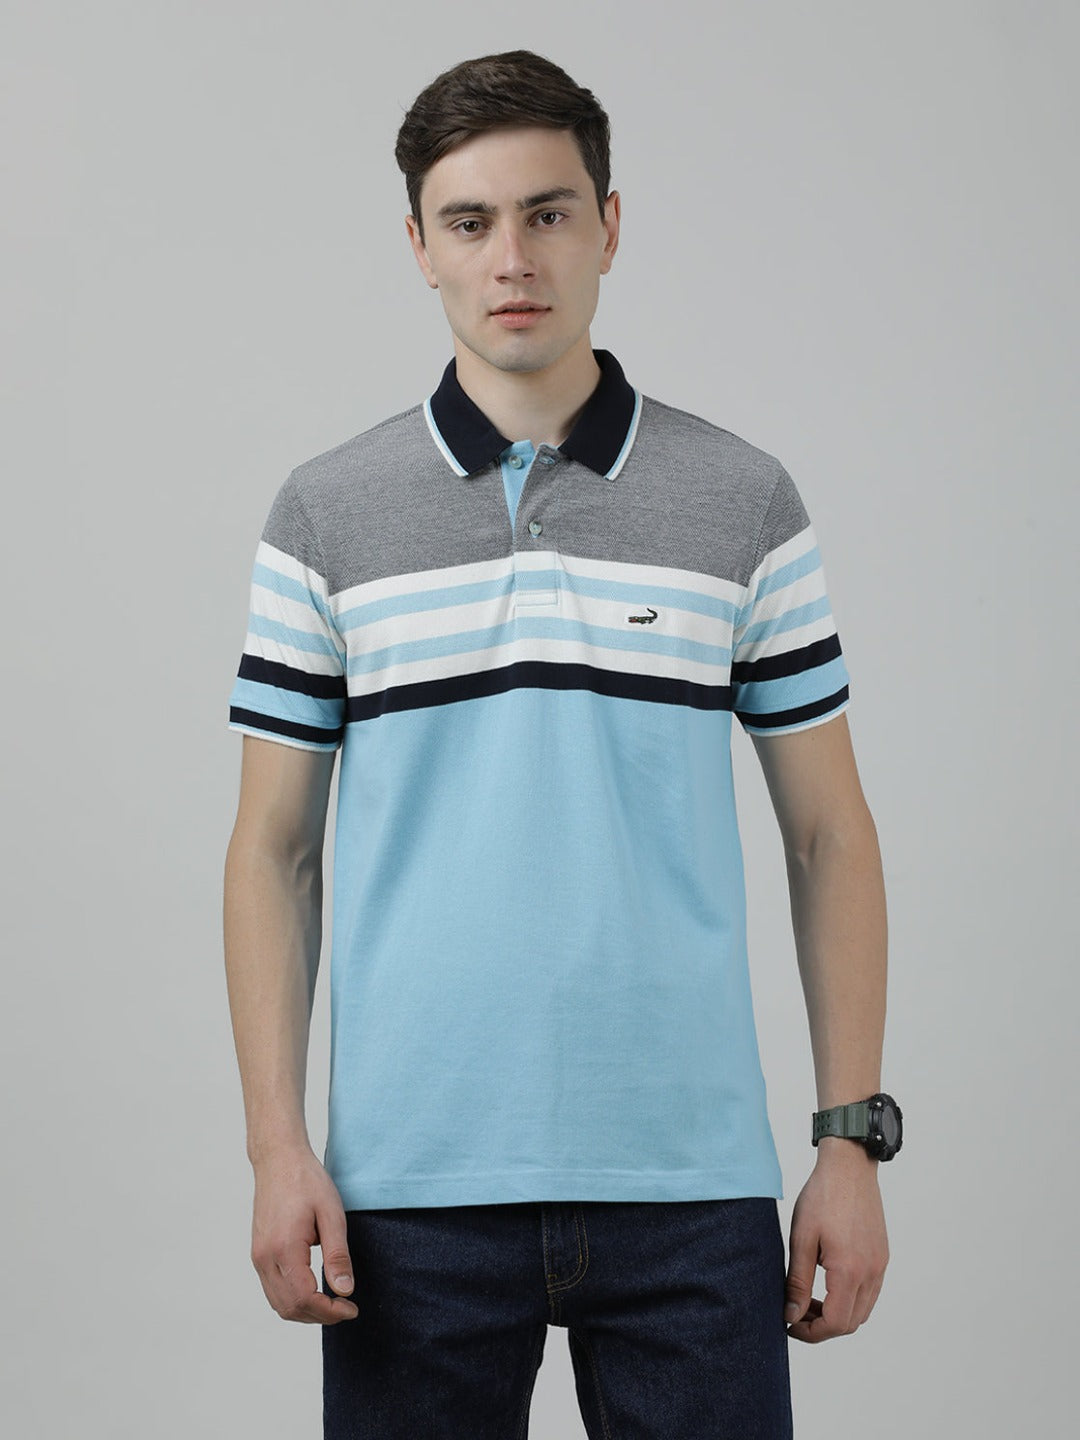 Casual Light Blue T-Shirt Engineering Stripes Half Sleeve Slim Fit with Collar for Men